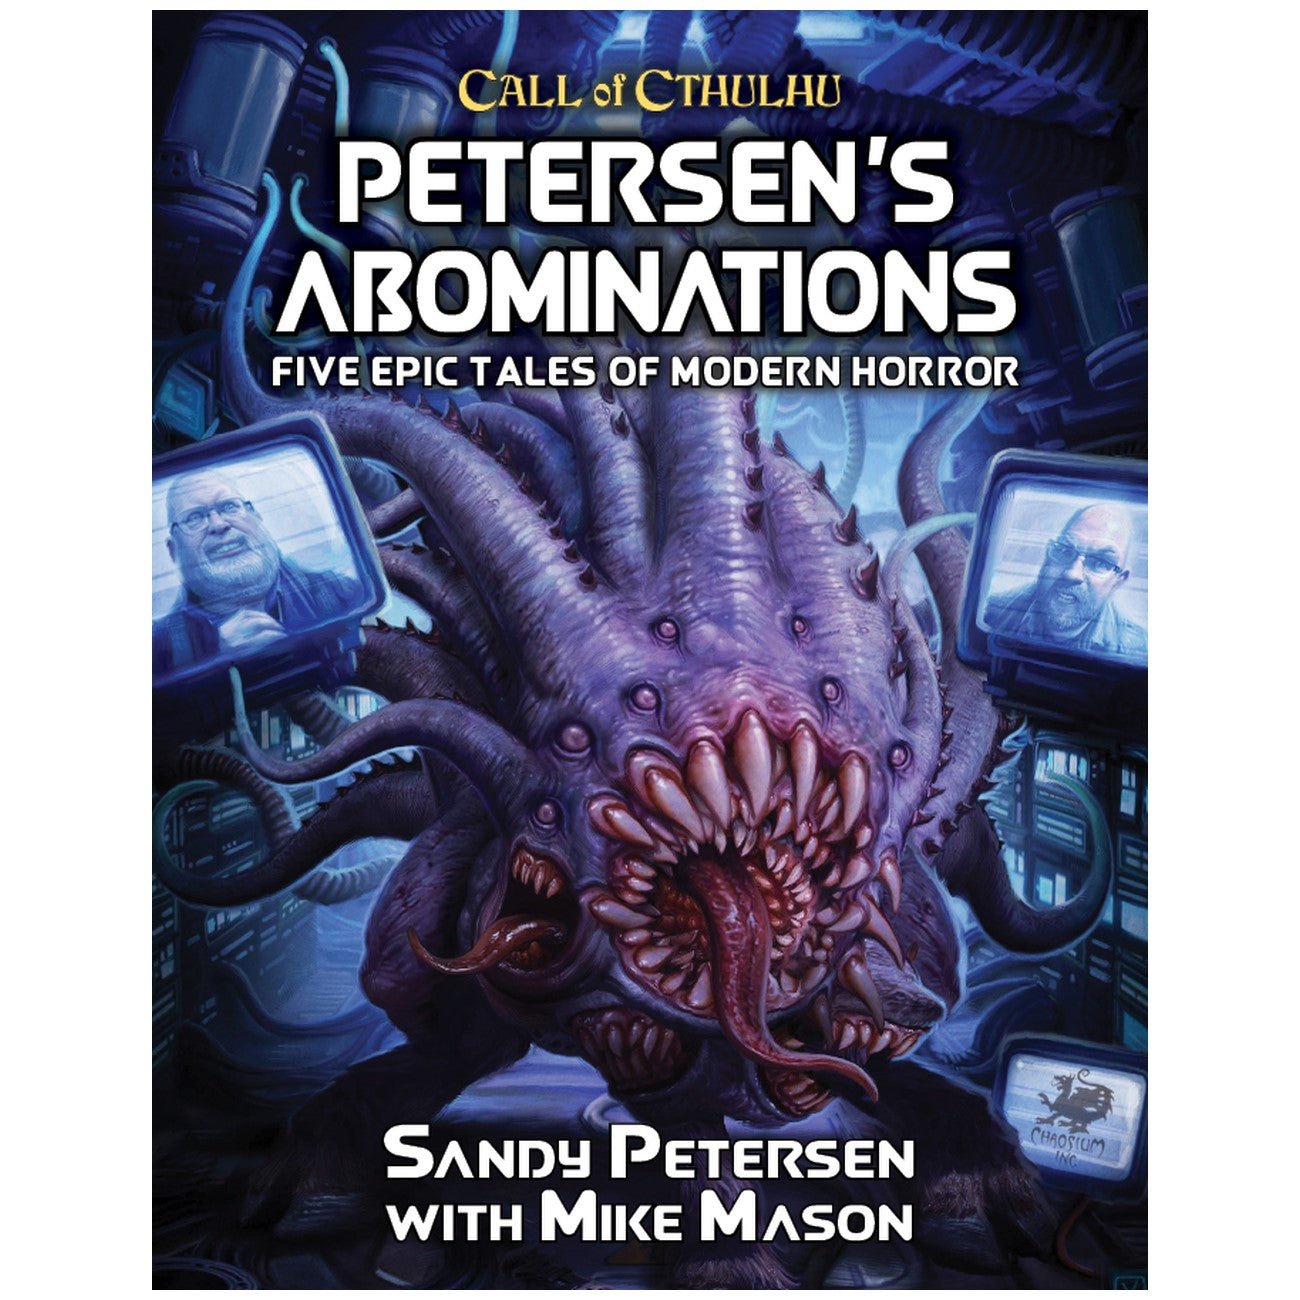 Call of Cthulhu Petersen's Abominations